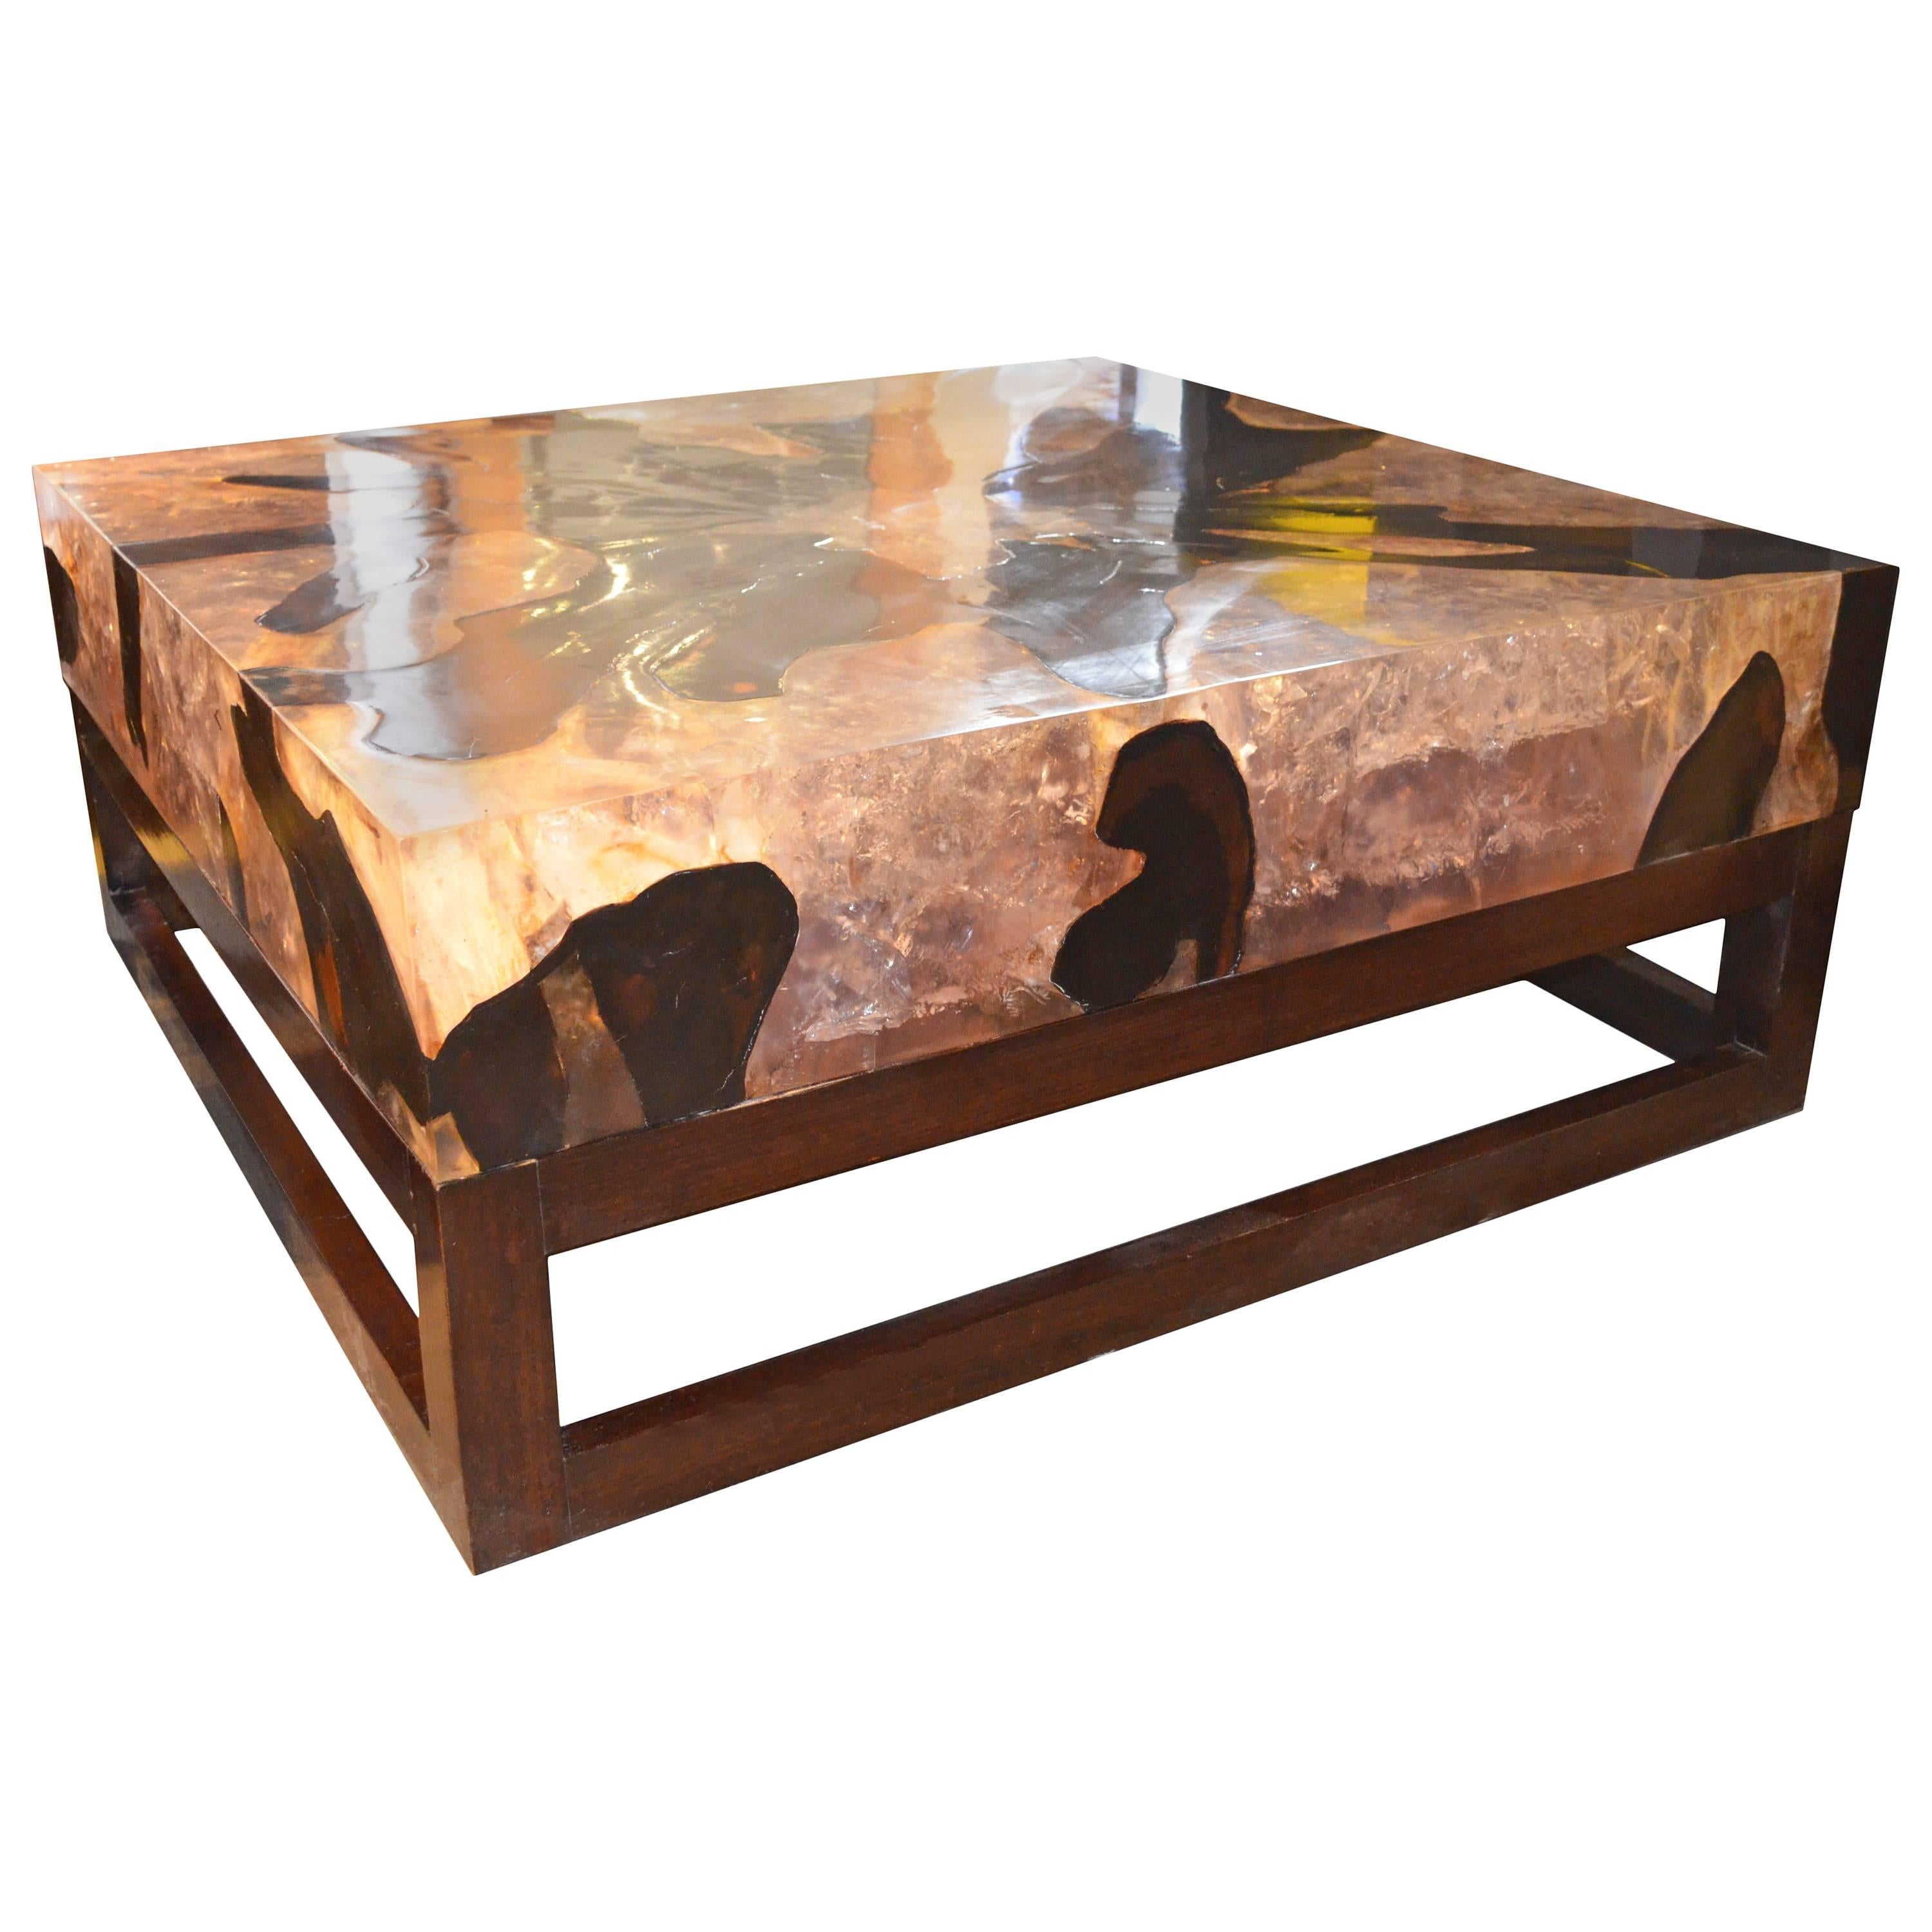 Andrianna Shamaris Cracked Resin Coffee Table For Sale